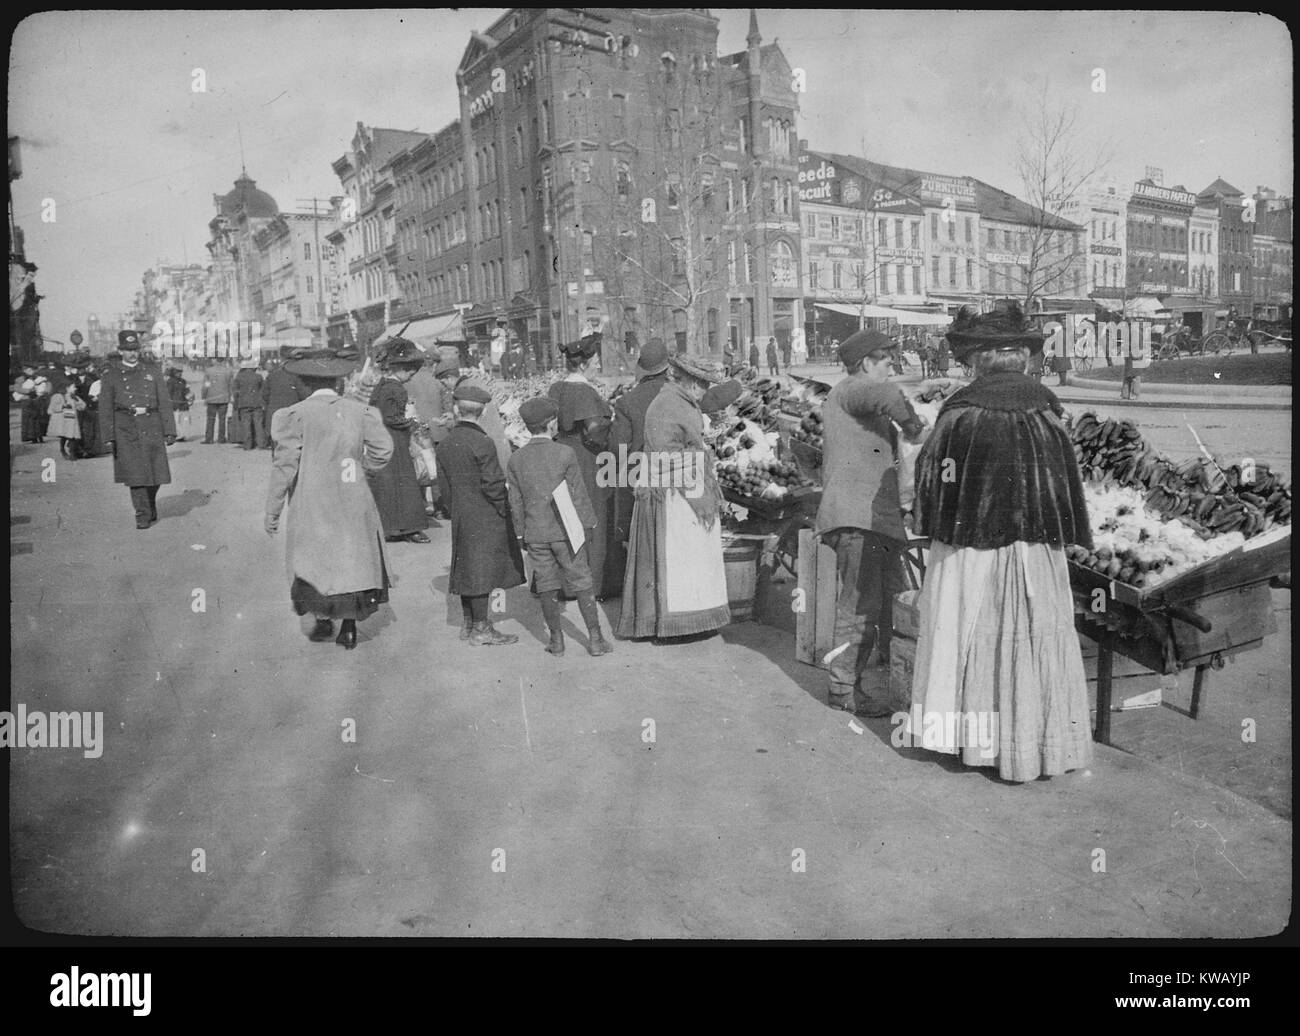 Patrons browse through an outdoor food market on 7th Street at Pennsylvania Avenue in Washington, D.C, 1900. Stock Photo